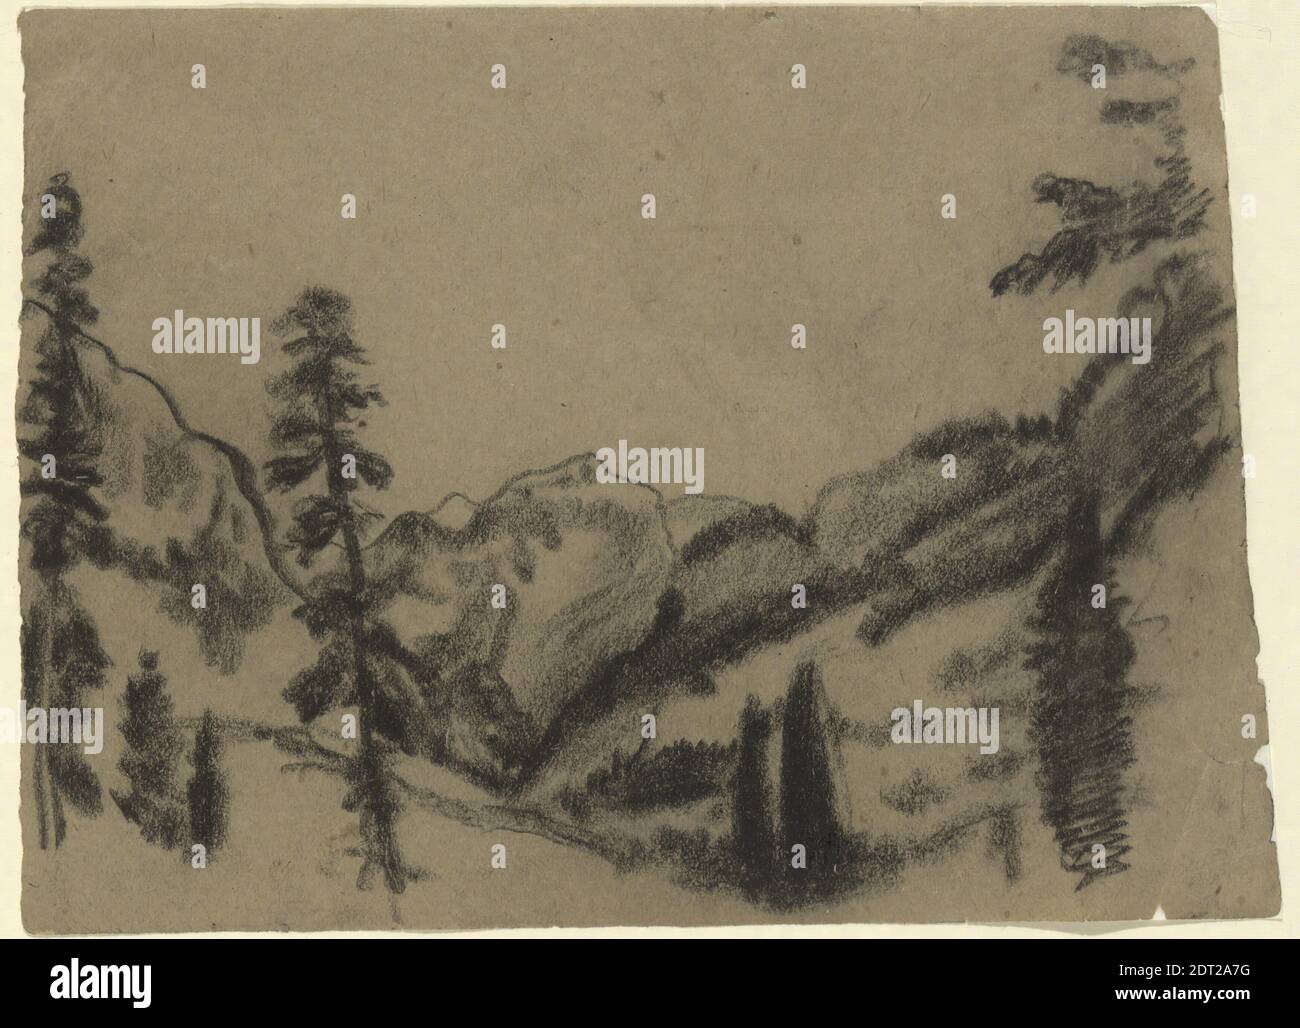 Artist: Arthur B. Davies, American, 1862–1928, Mountain Landscape with Fir Trees, Black Chalk on tan paper, 11.4 × 15.9 cm (4 1/2 × 6 1/4 in.), made in United States, American, 19th Century, Works on Paper - Drawings and Watercolours Foto Stock